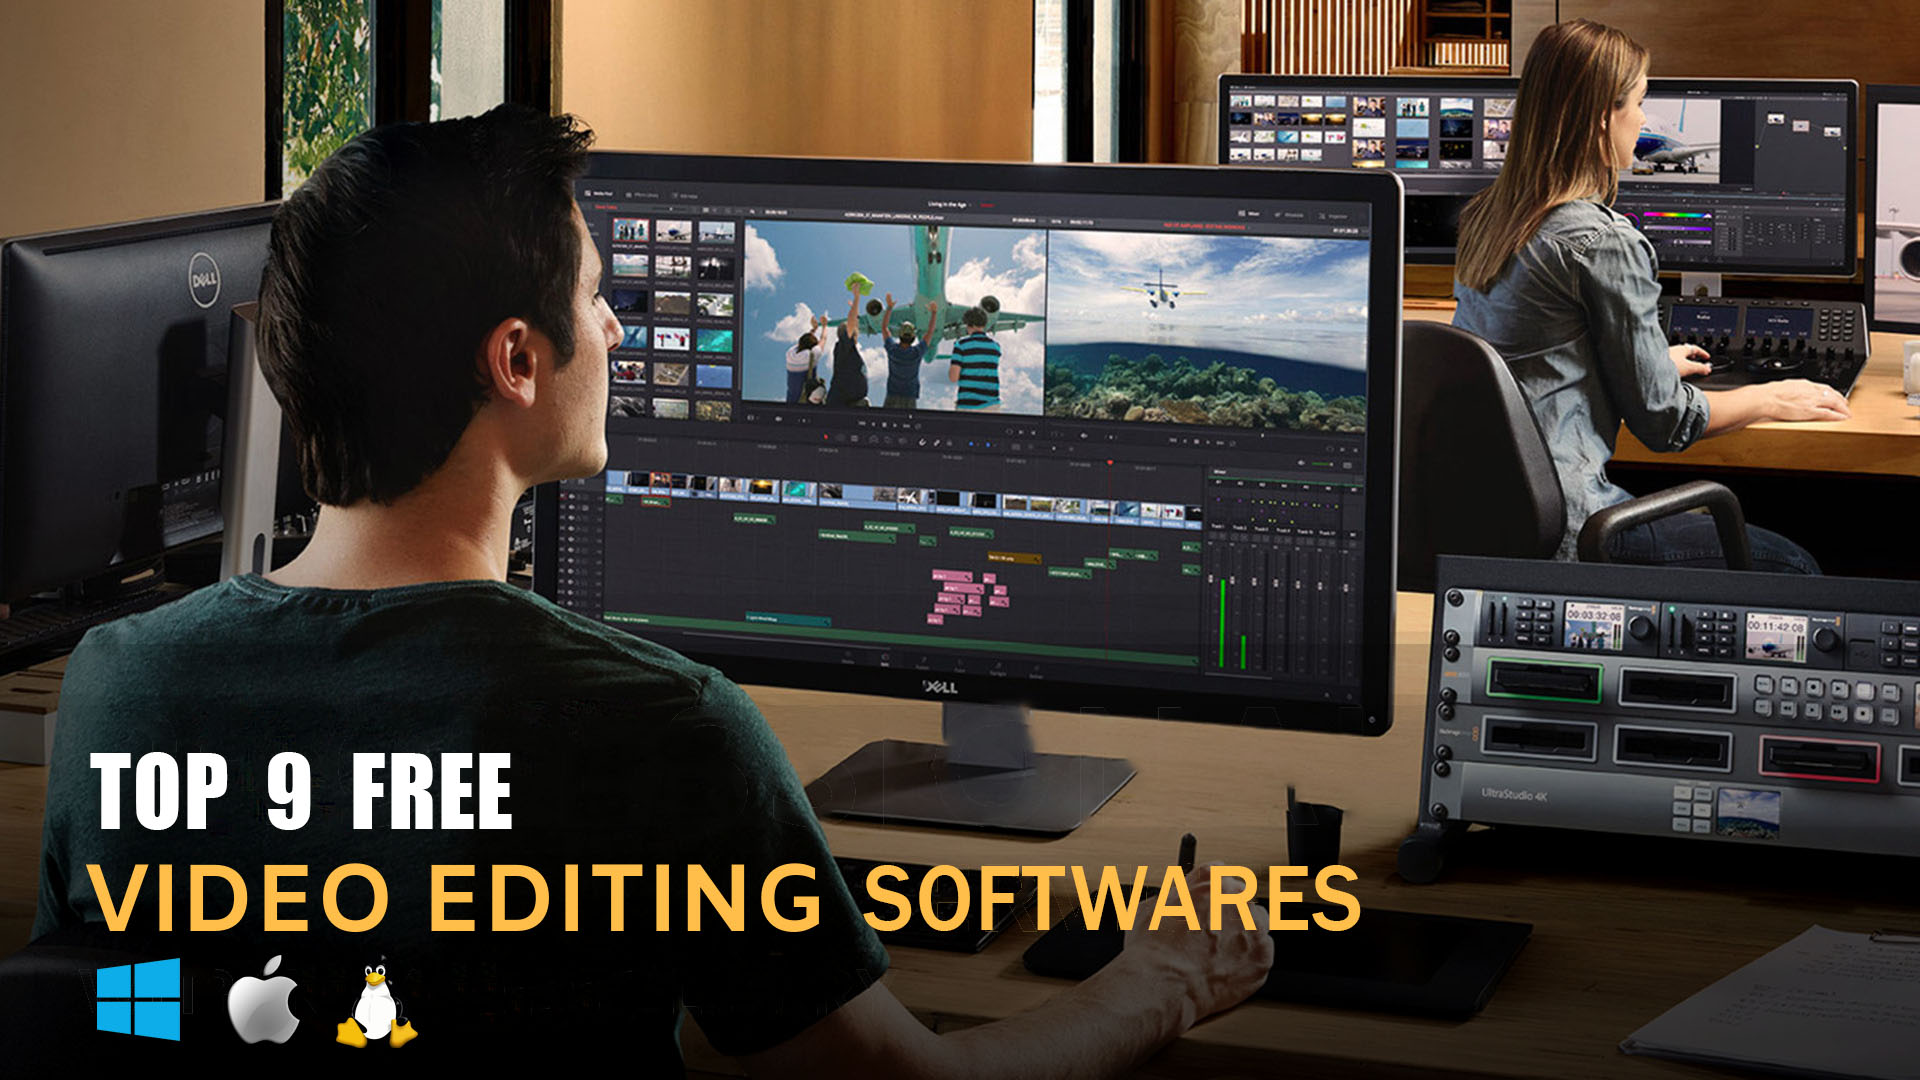 free video editing software for windows 7 32 bit